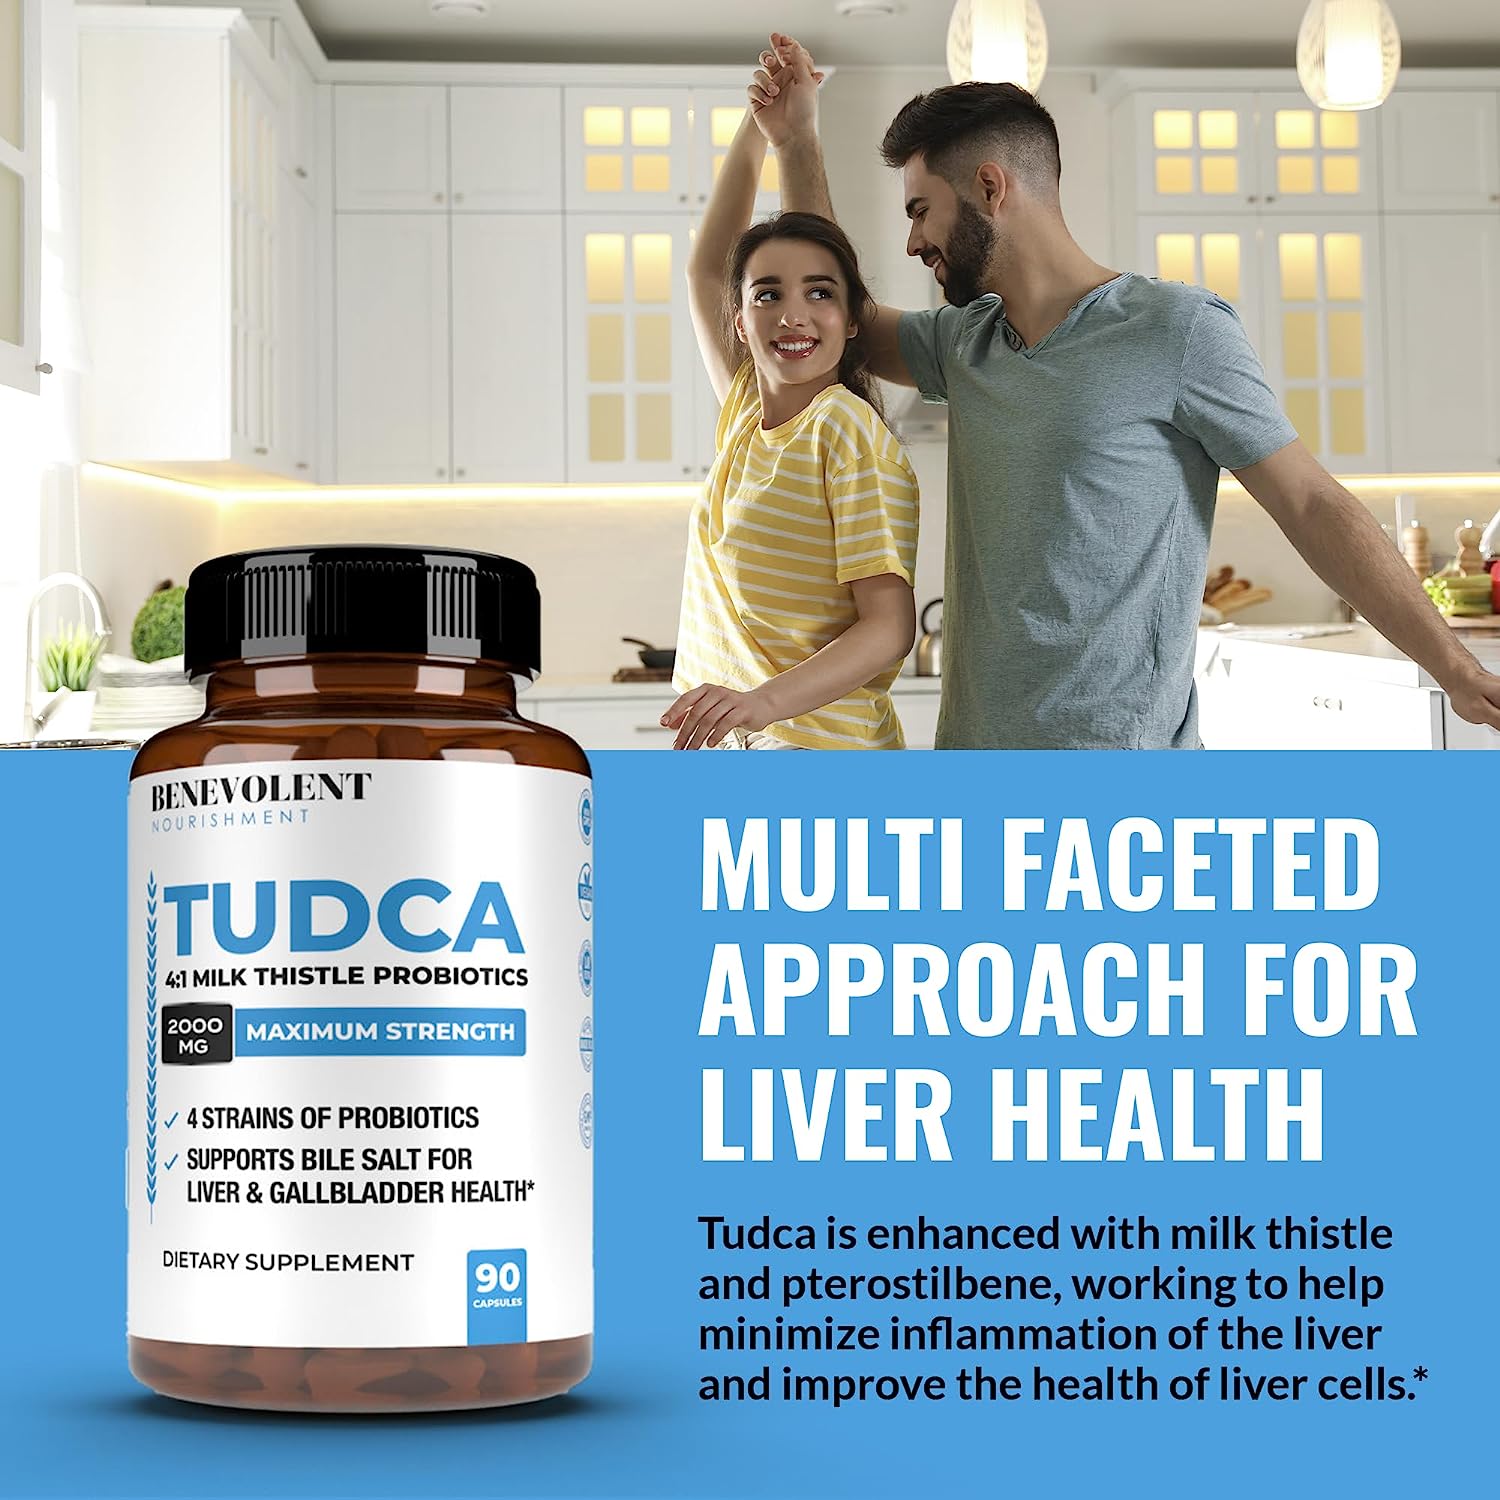 Multi-faceted approach to liver health